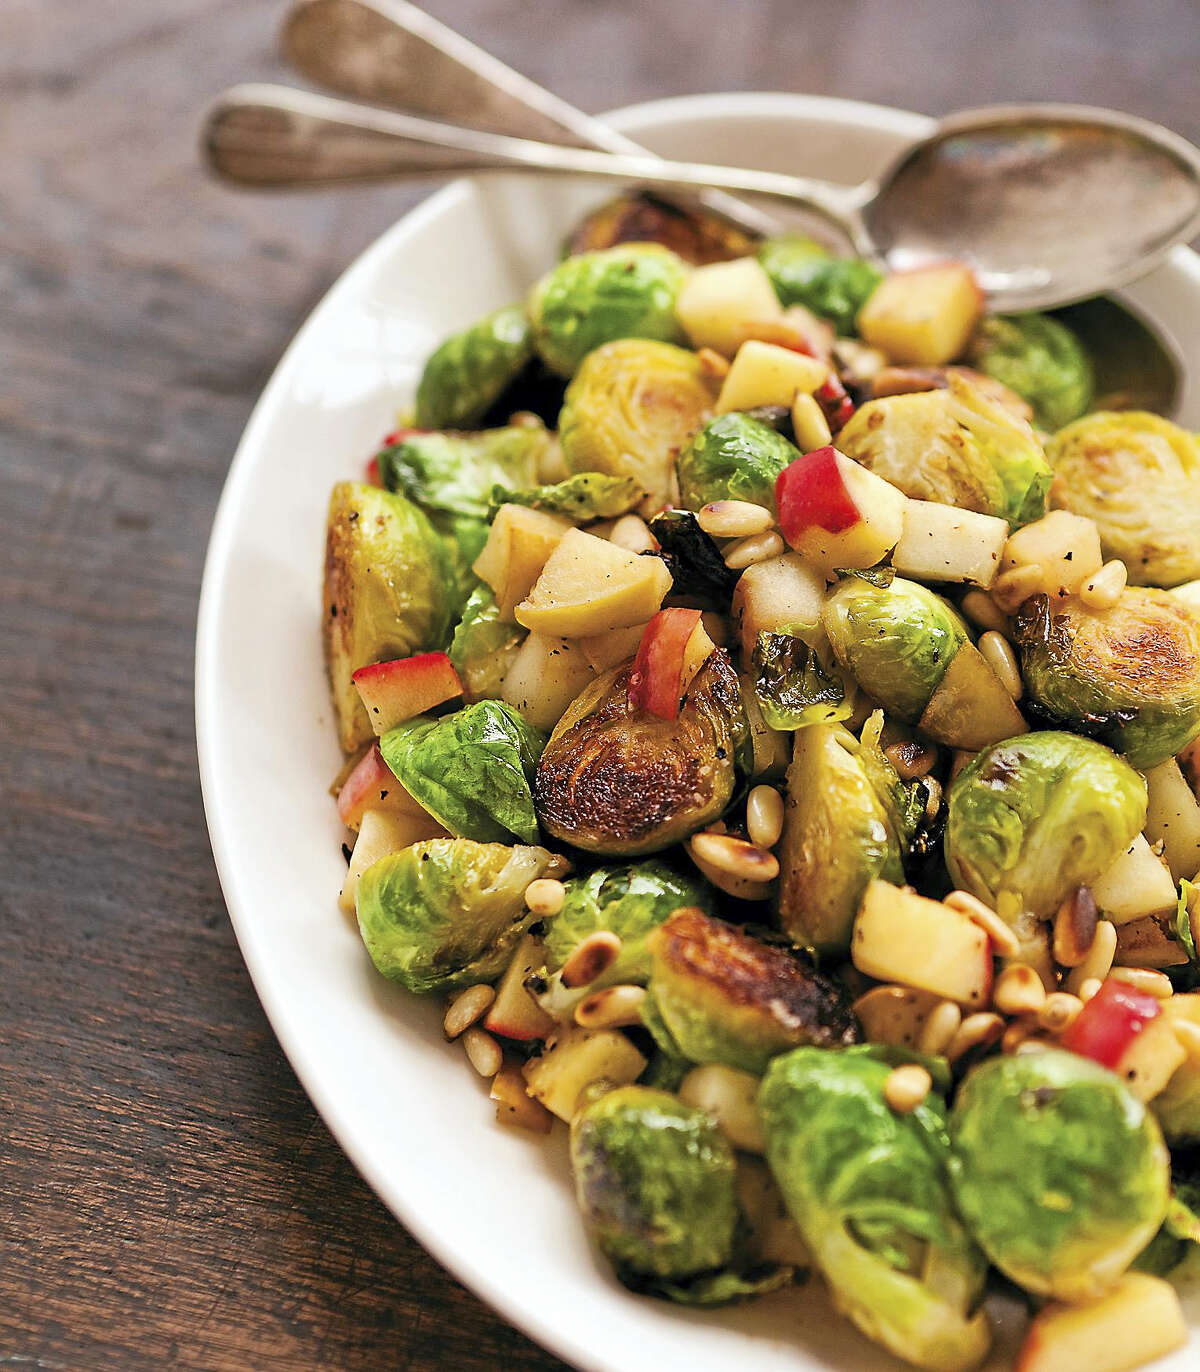 Sautéed Brussels sprouts and apples provides a nice contrast of bitter and sweet.